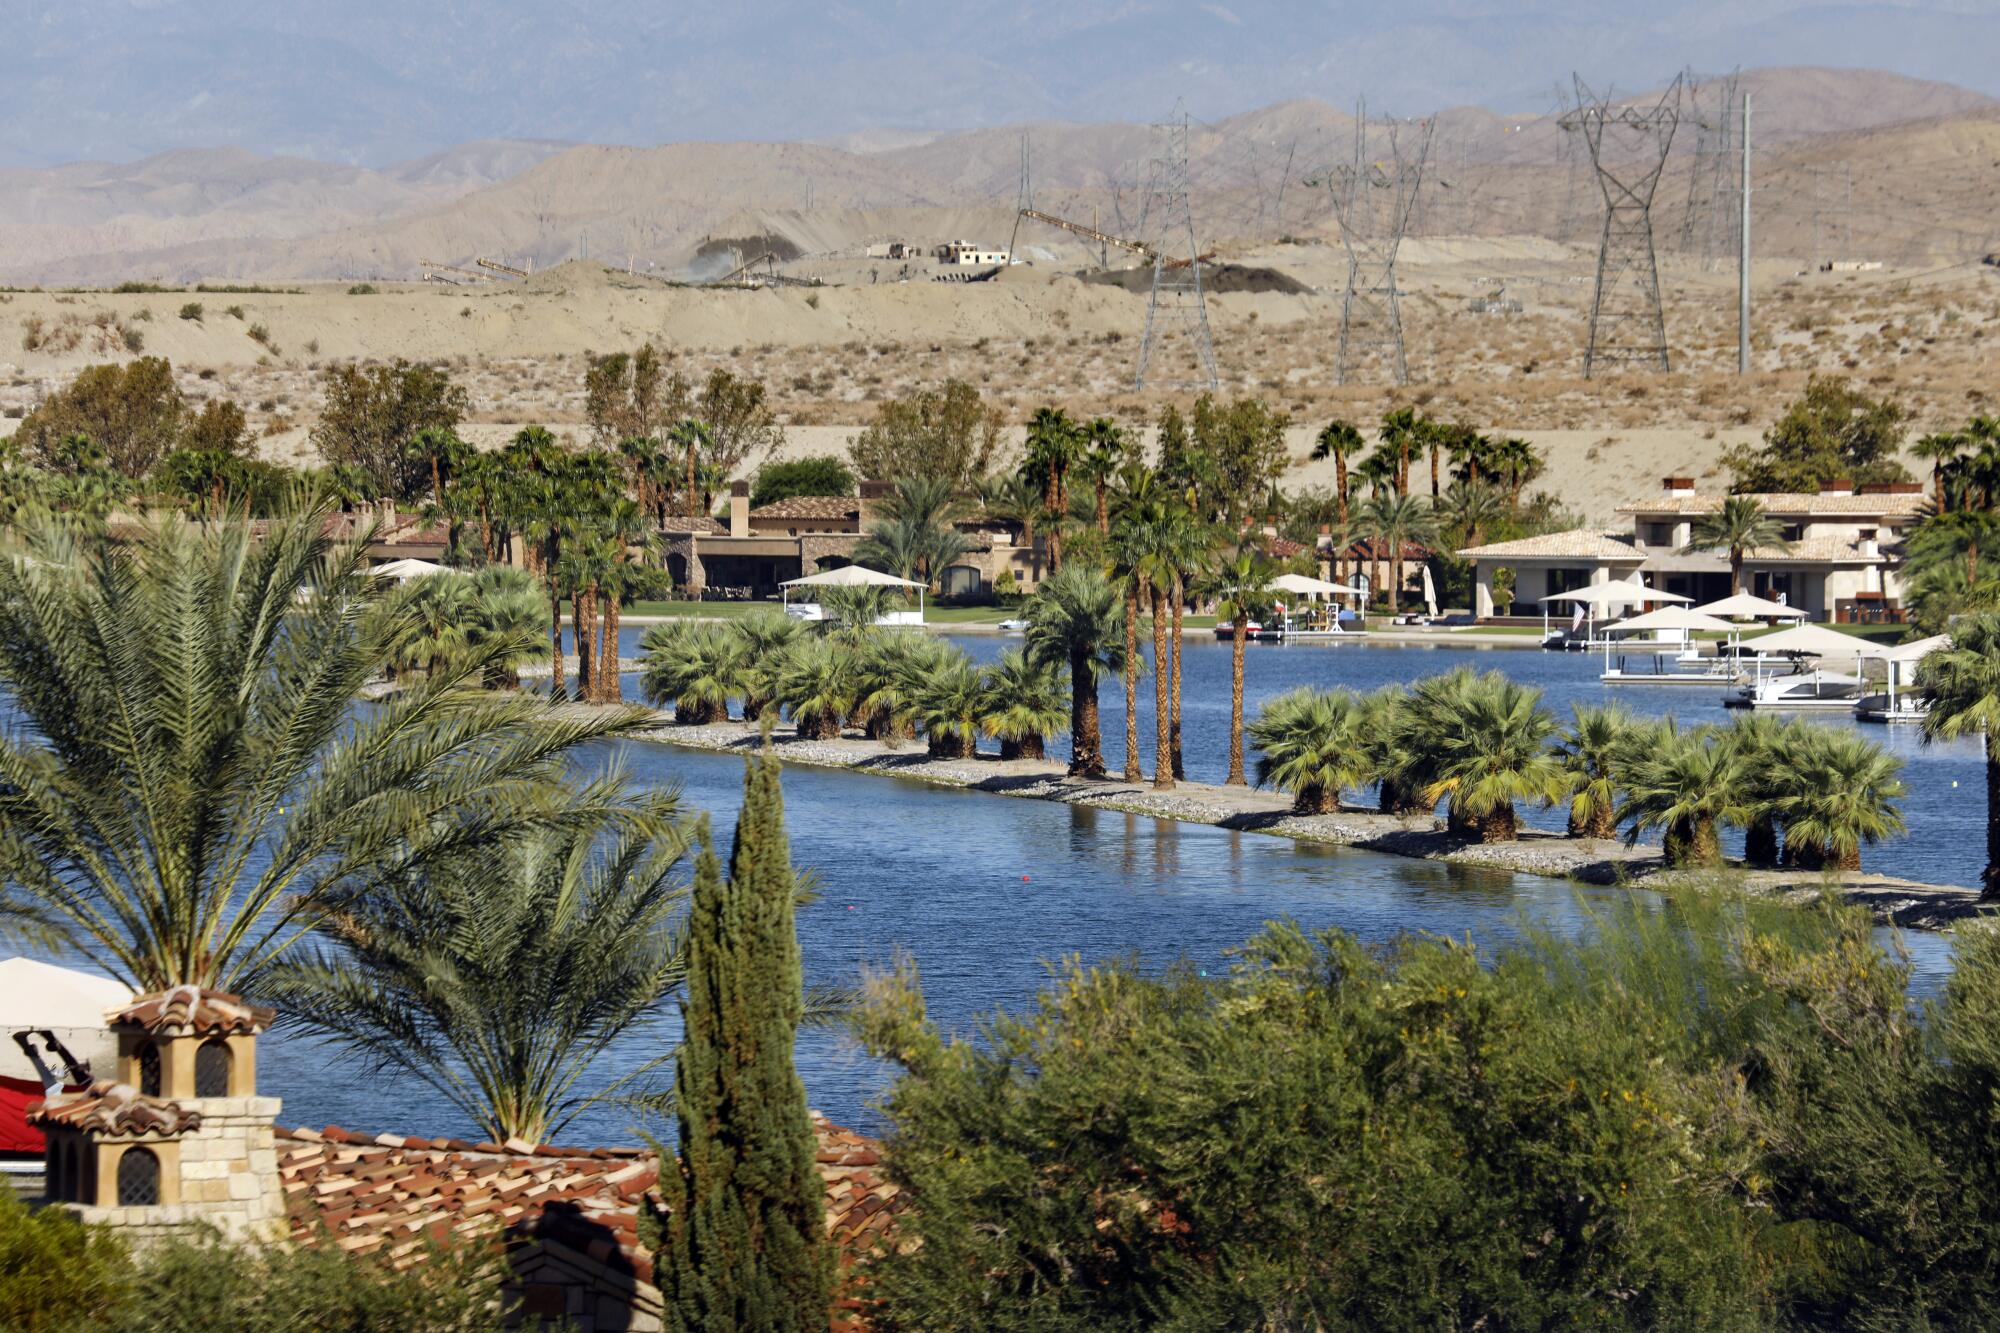 An artificial lake in the desert is surrounded by homes